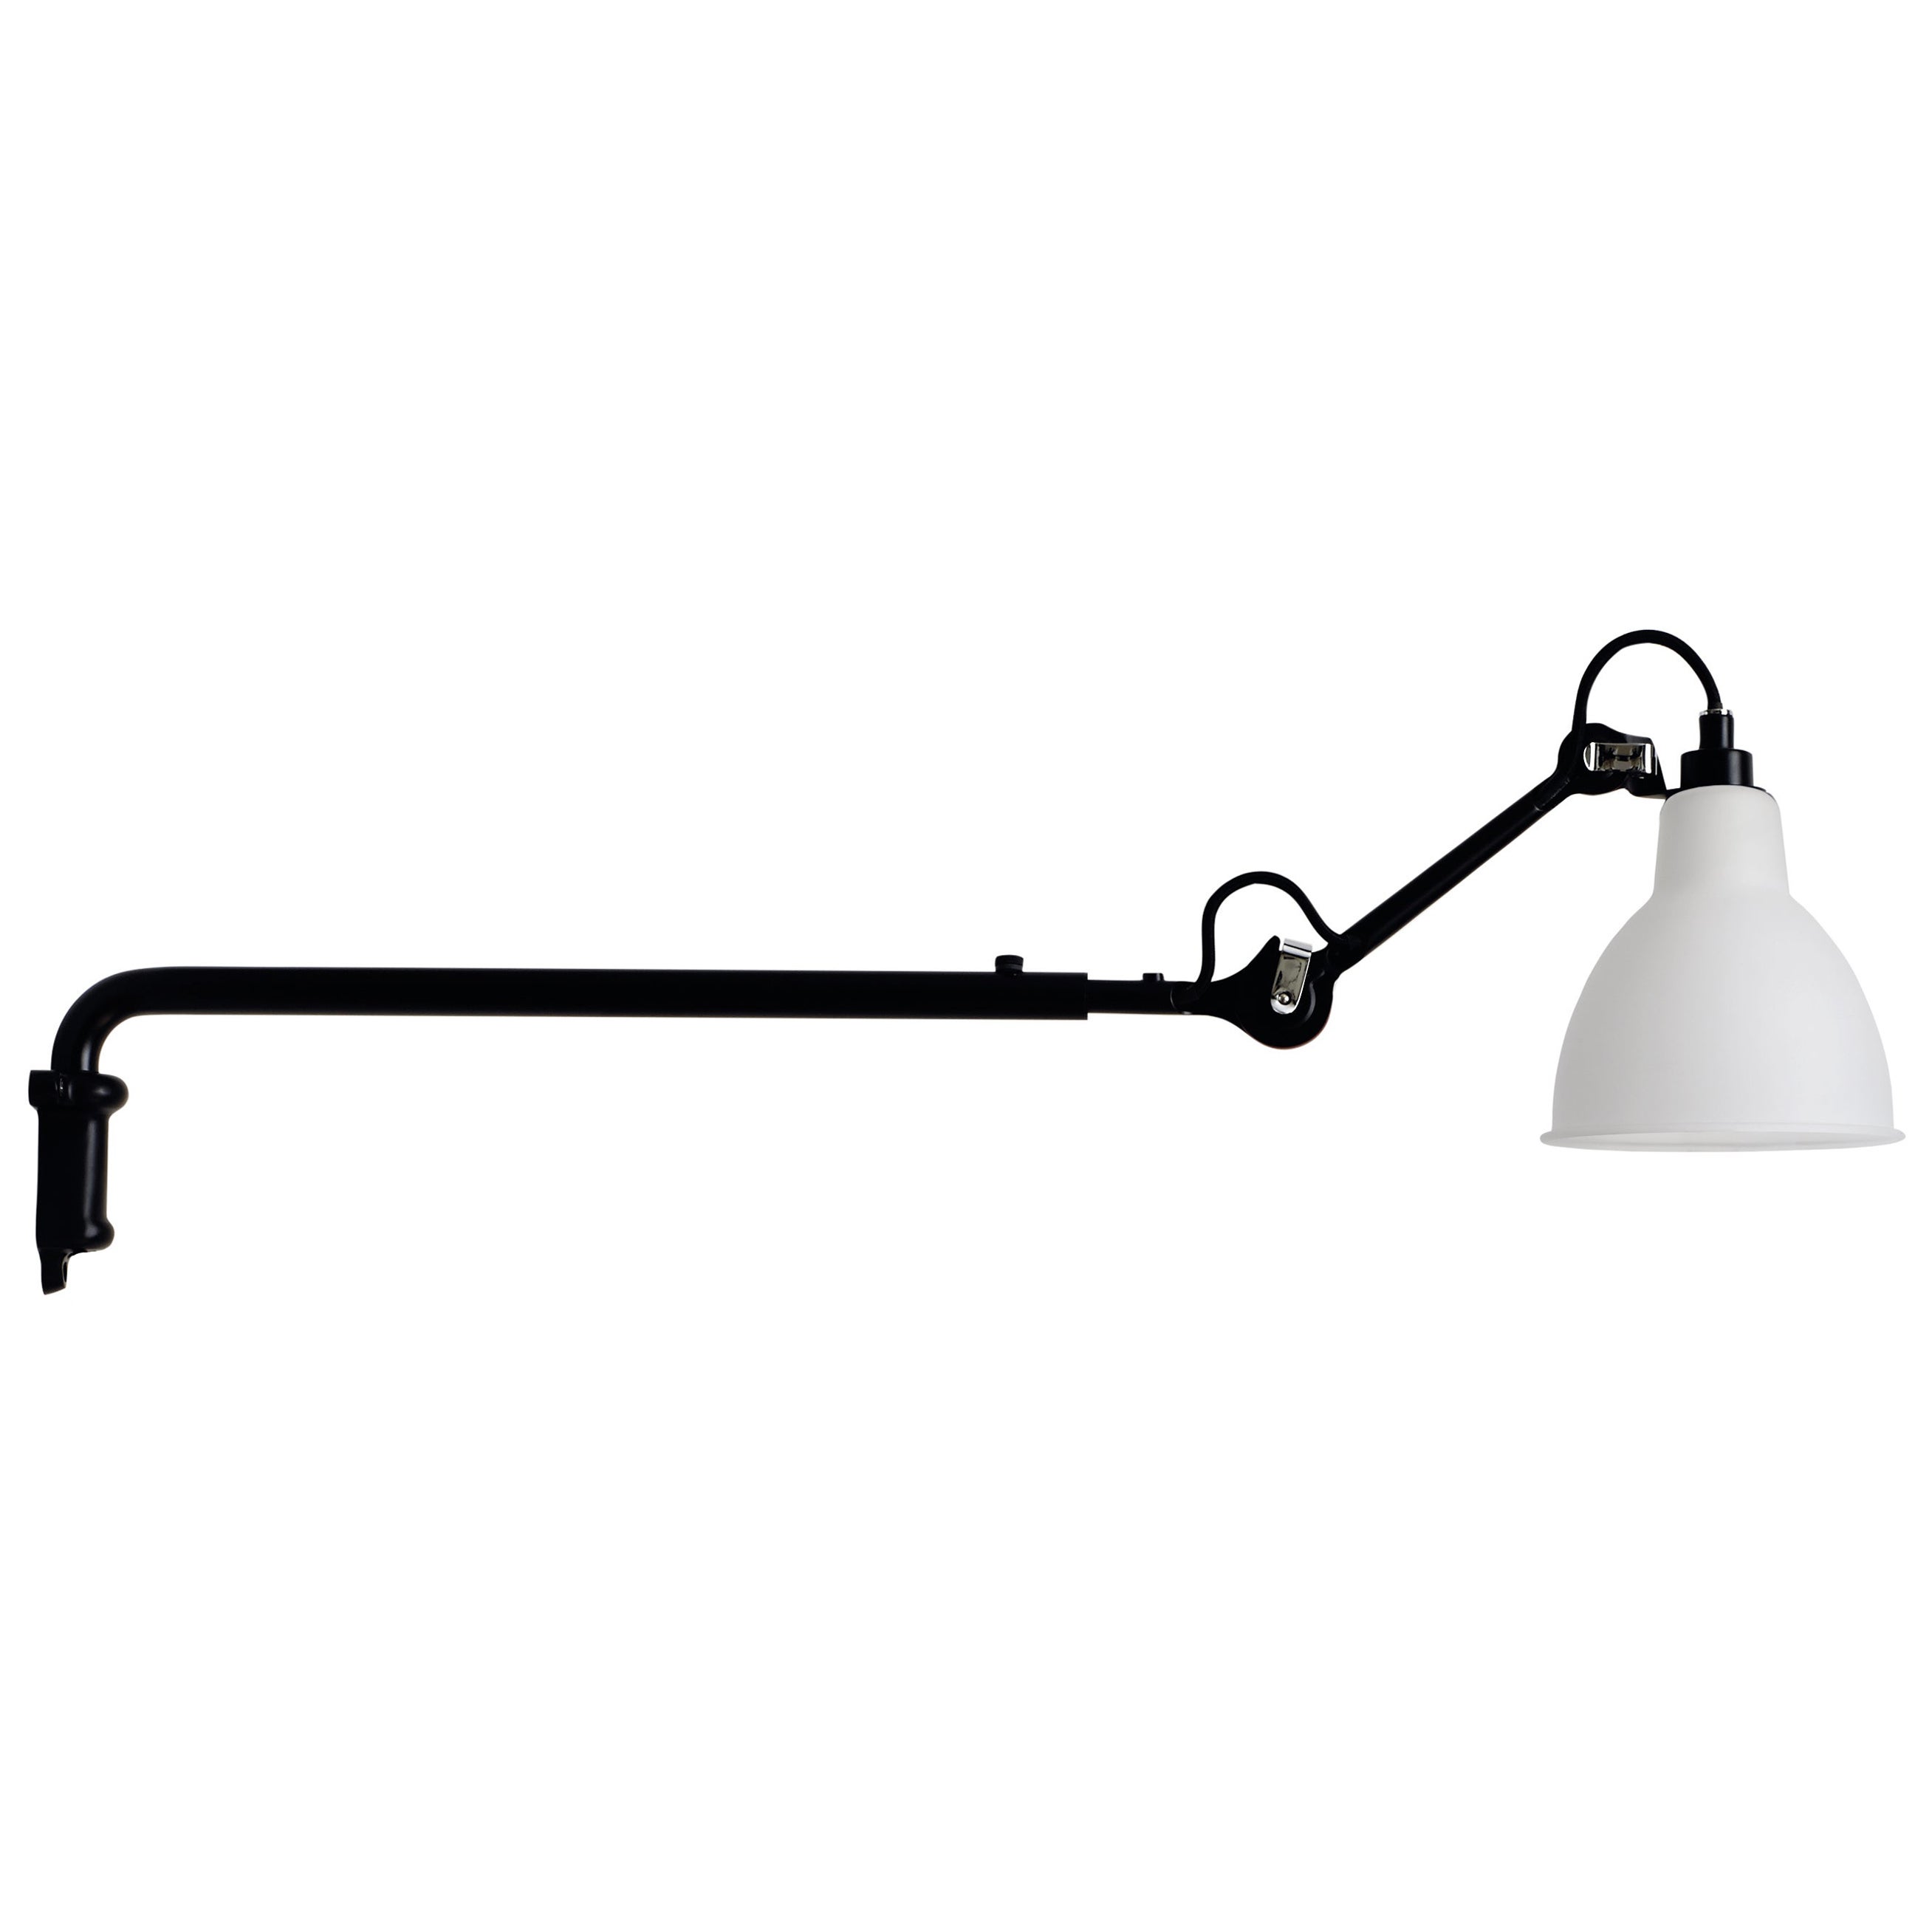 DCW Editions La Lampe Gras N°203 Wall Lamp in Black Arm & Frosted Glass Shade